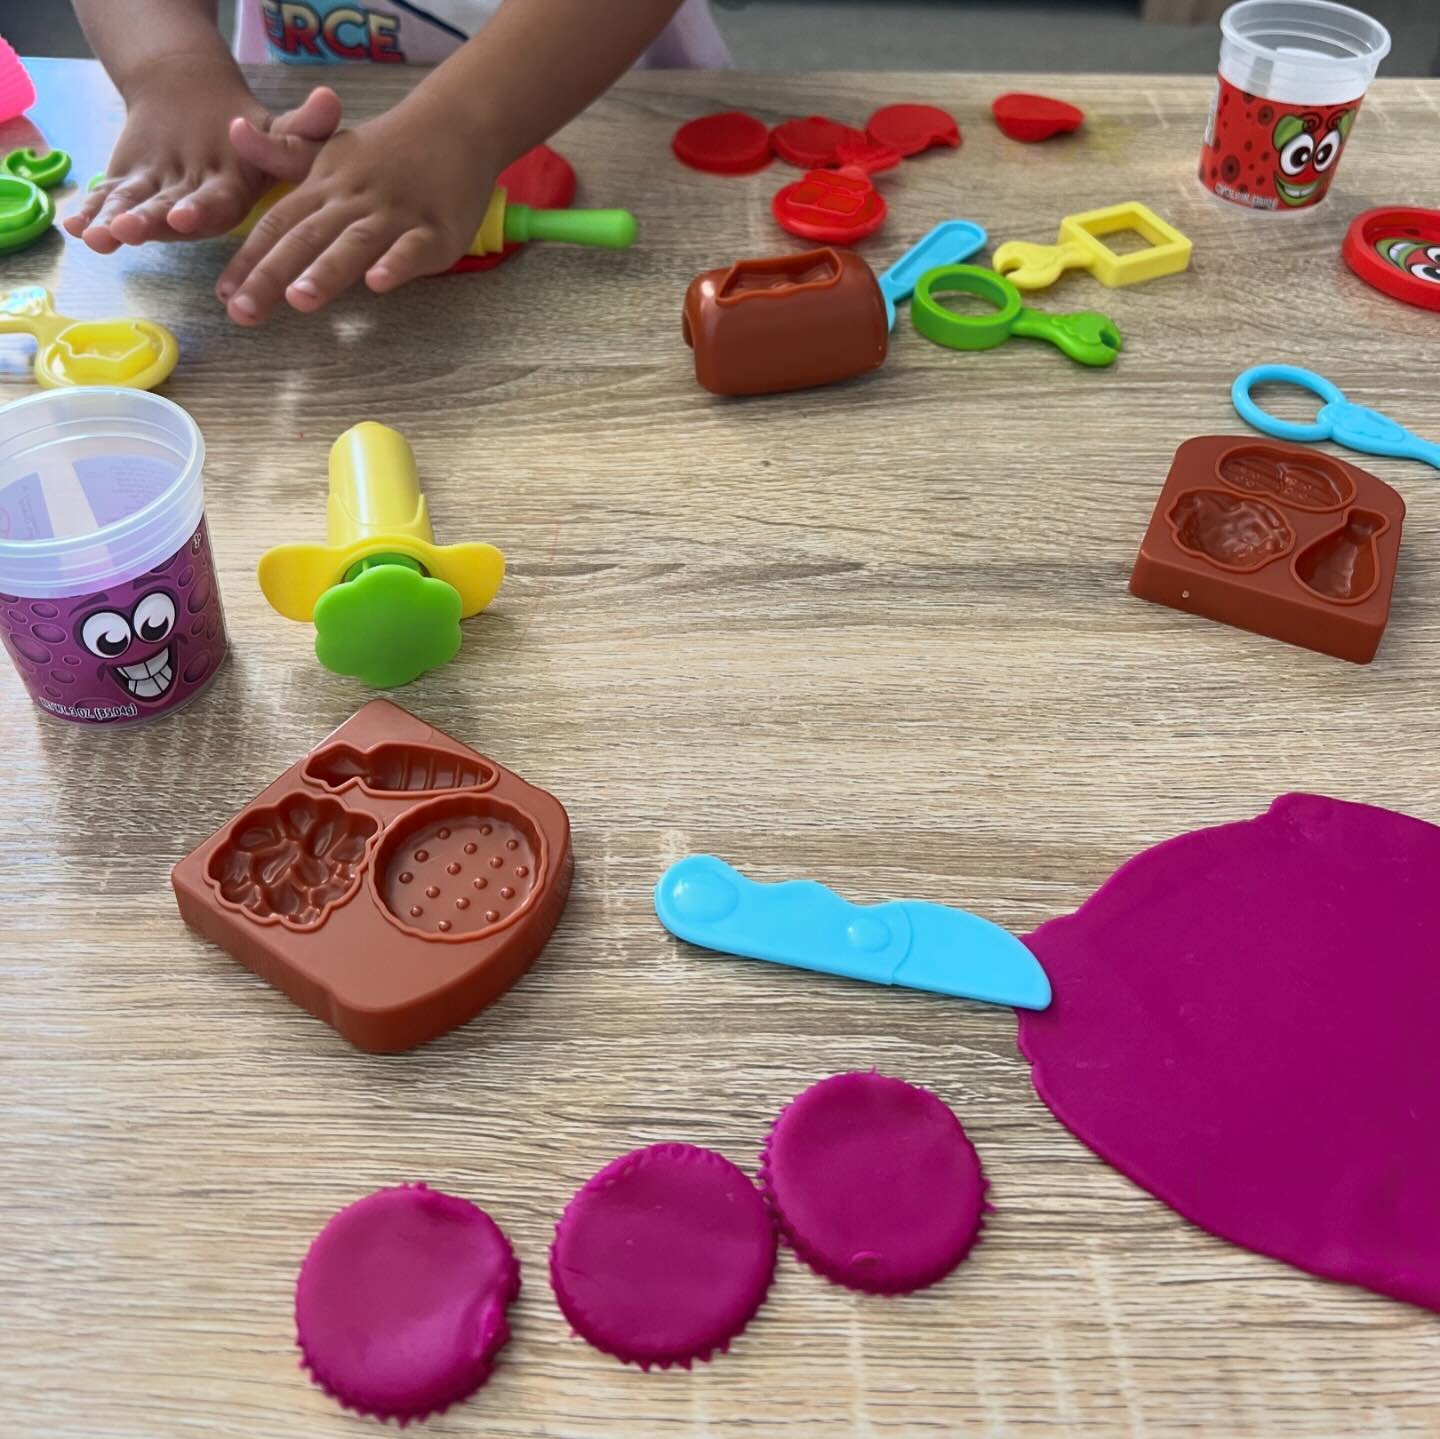 Check out all the fun things Chiara&rsquo;s been getting up to in her sessions lately! 
&bull; fine motor play with scented play dough 
&bull; manicures 💅🏼 
&bull; making toilet training fun! 

We have capacity for new OT referrals (for self and pl